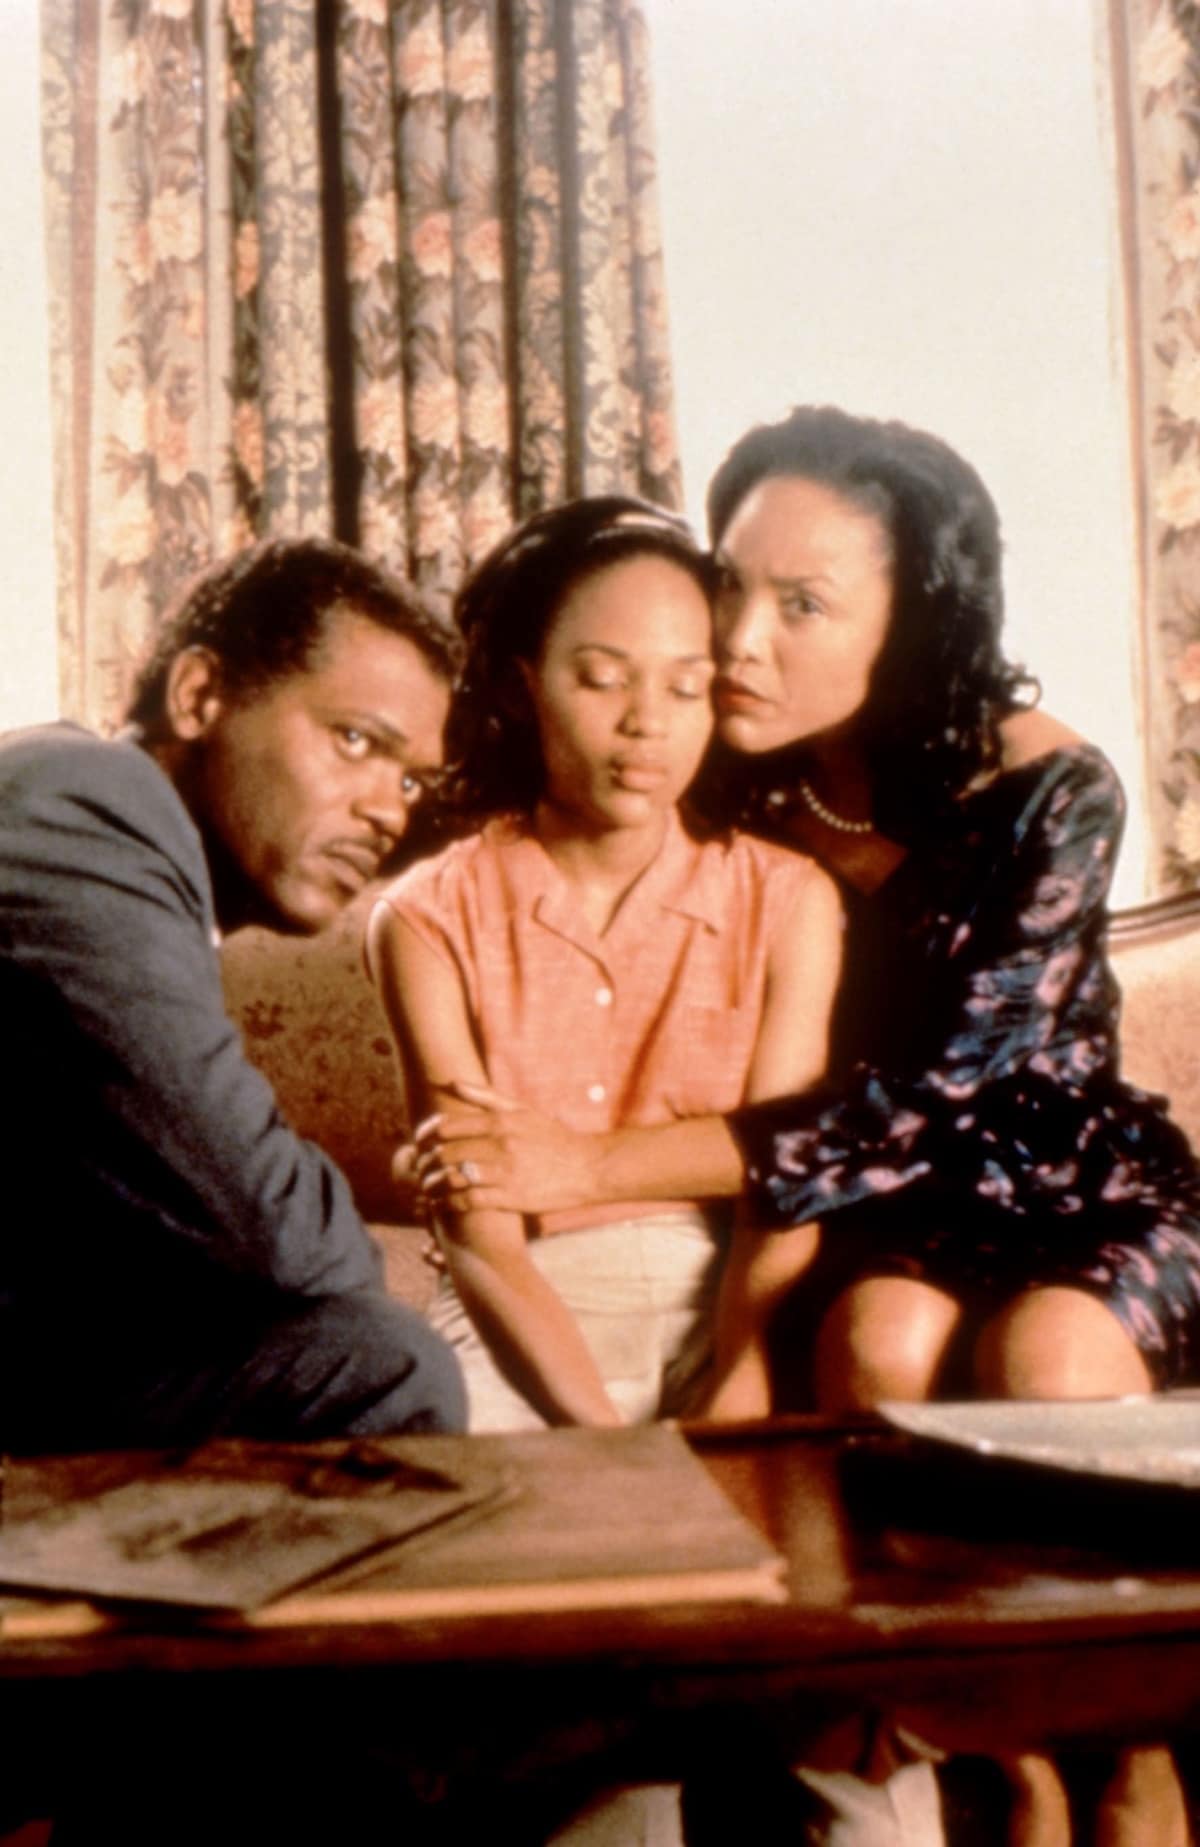 Samuel L. Jackson as Louis Batiste, Lynn Whitfield as Roz Batiste, and Meagan Good as Cisely Batiste in the 1997 American Southern Gothic drama film Eve's Bayou